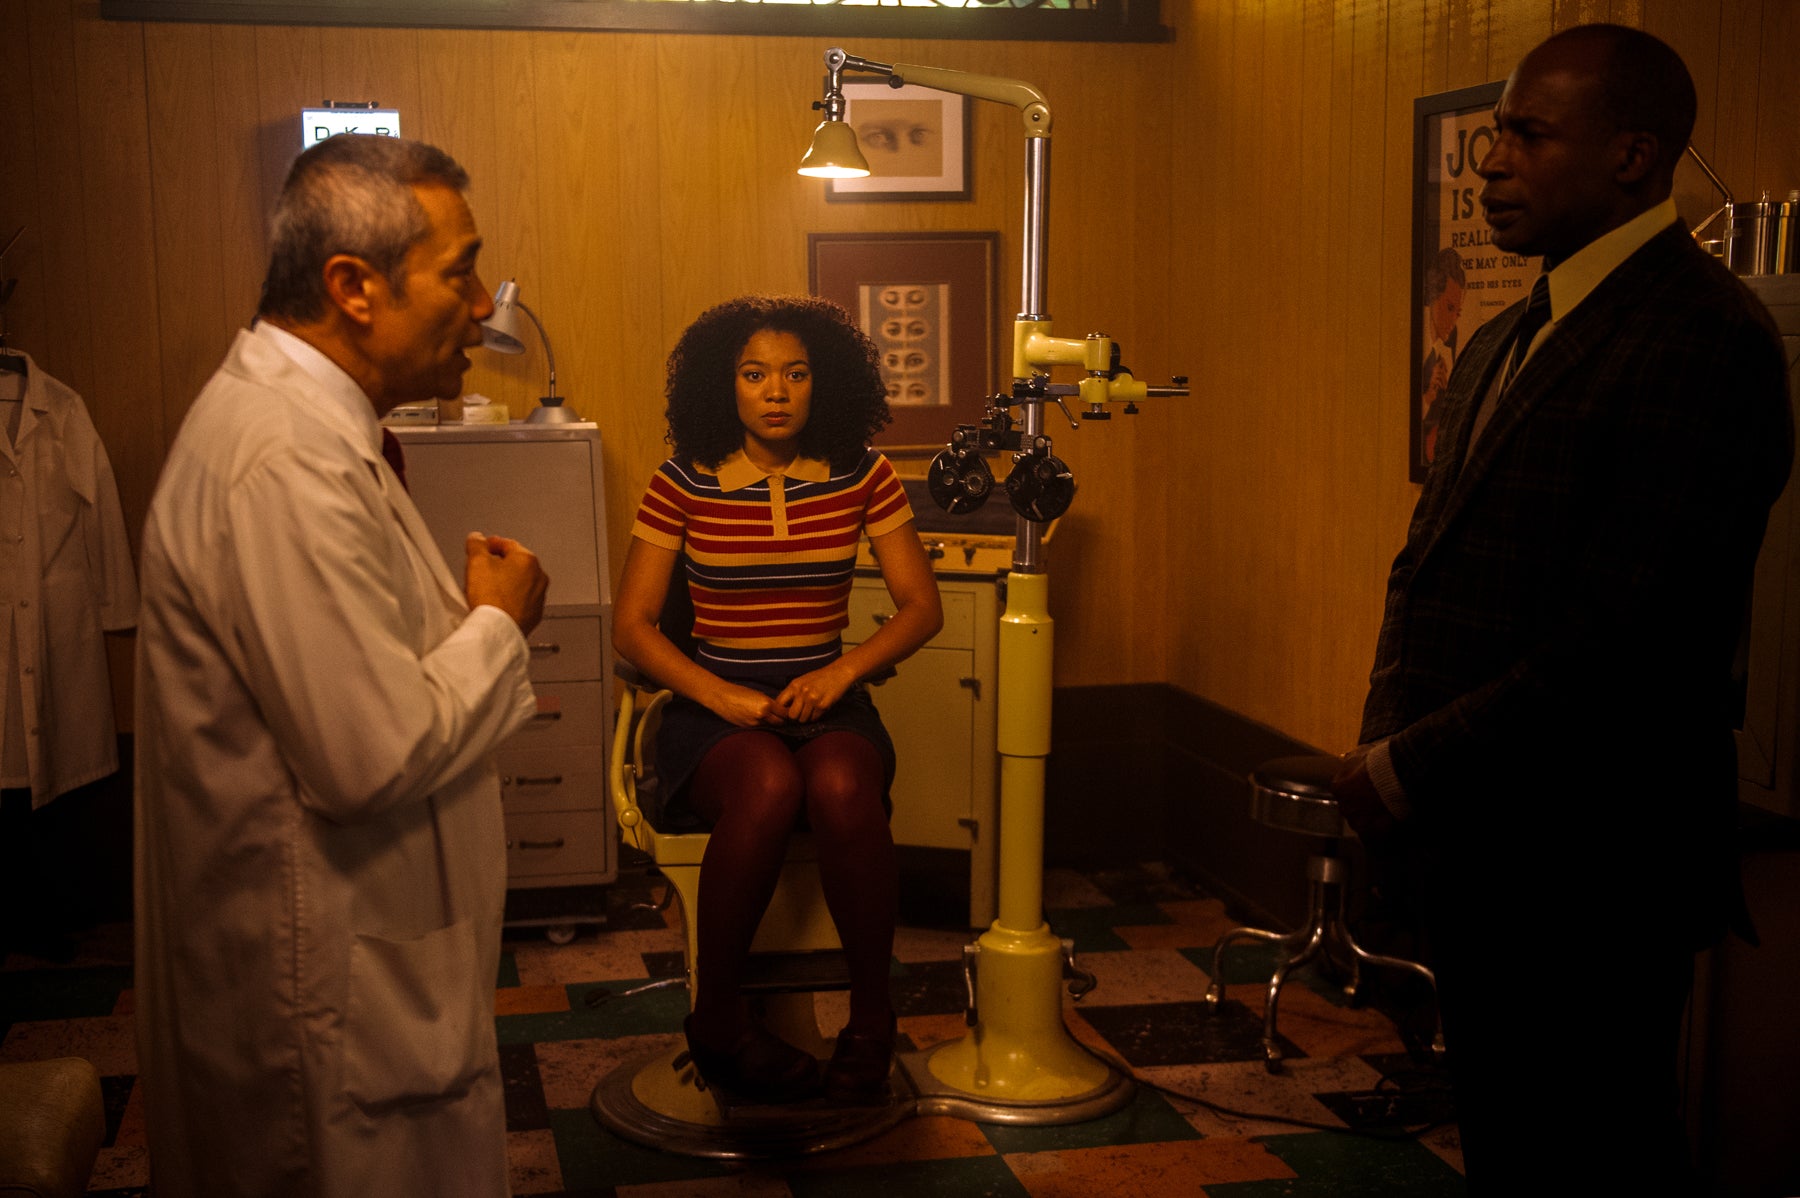 Ros sits in a chair in a medical office while an ophthalmologist speaks with her father in the foreground in a scene from Chilling Adventures of Sabrina.